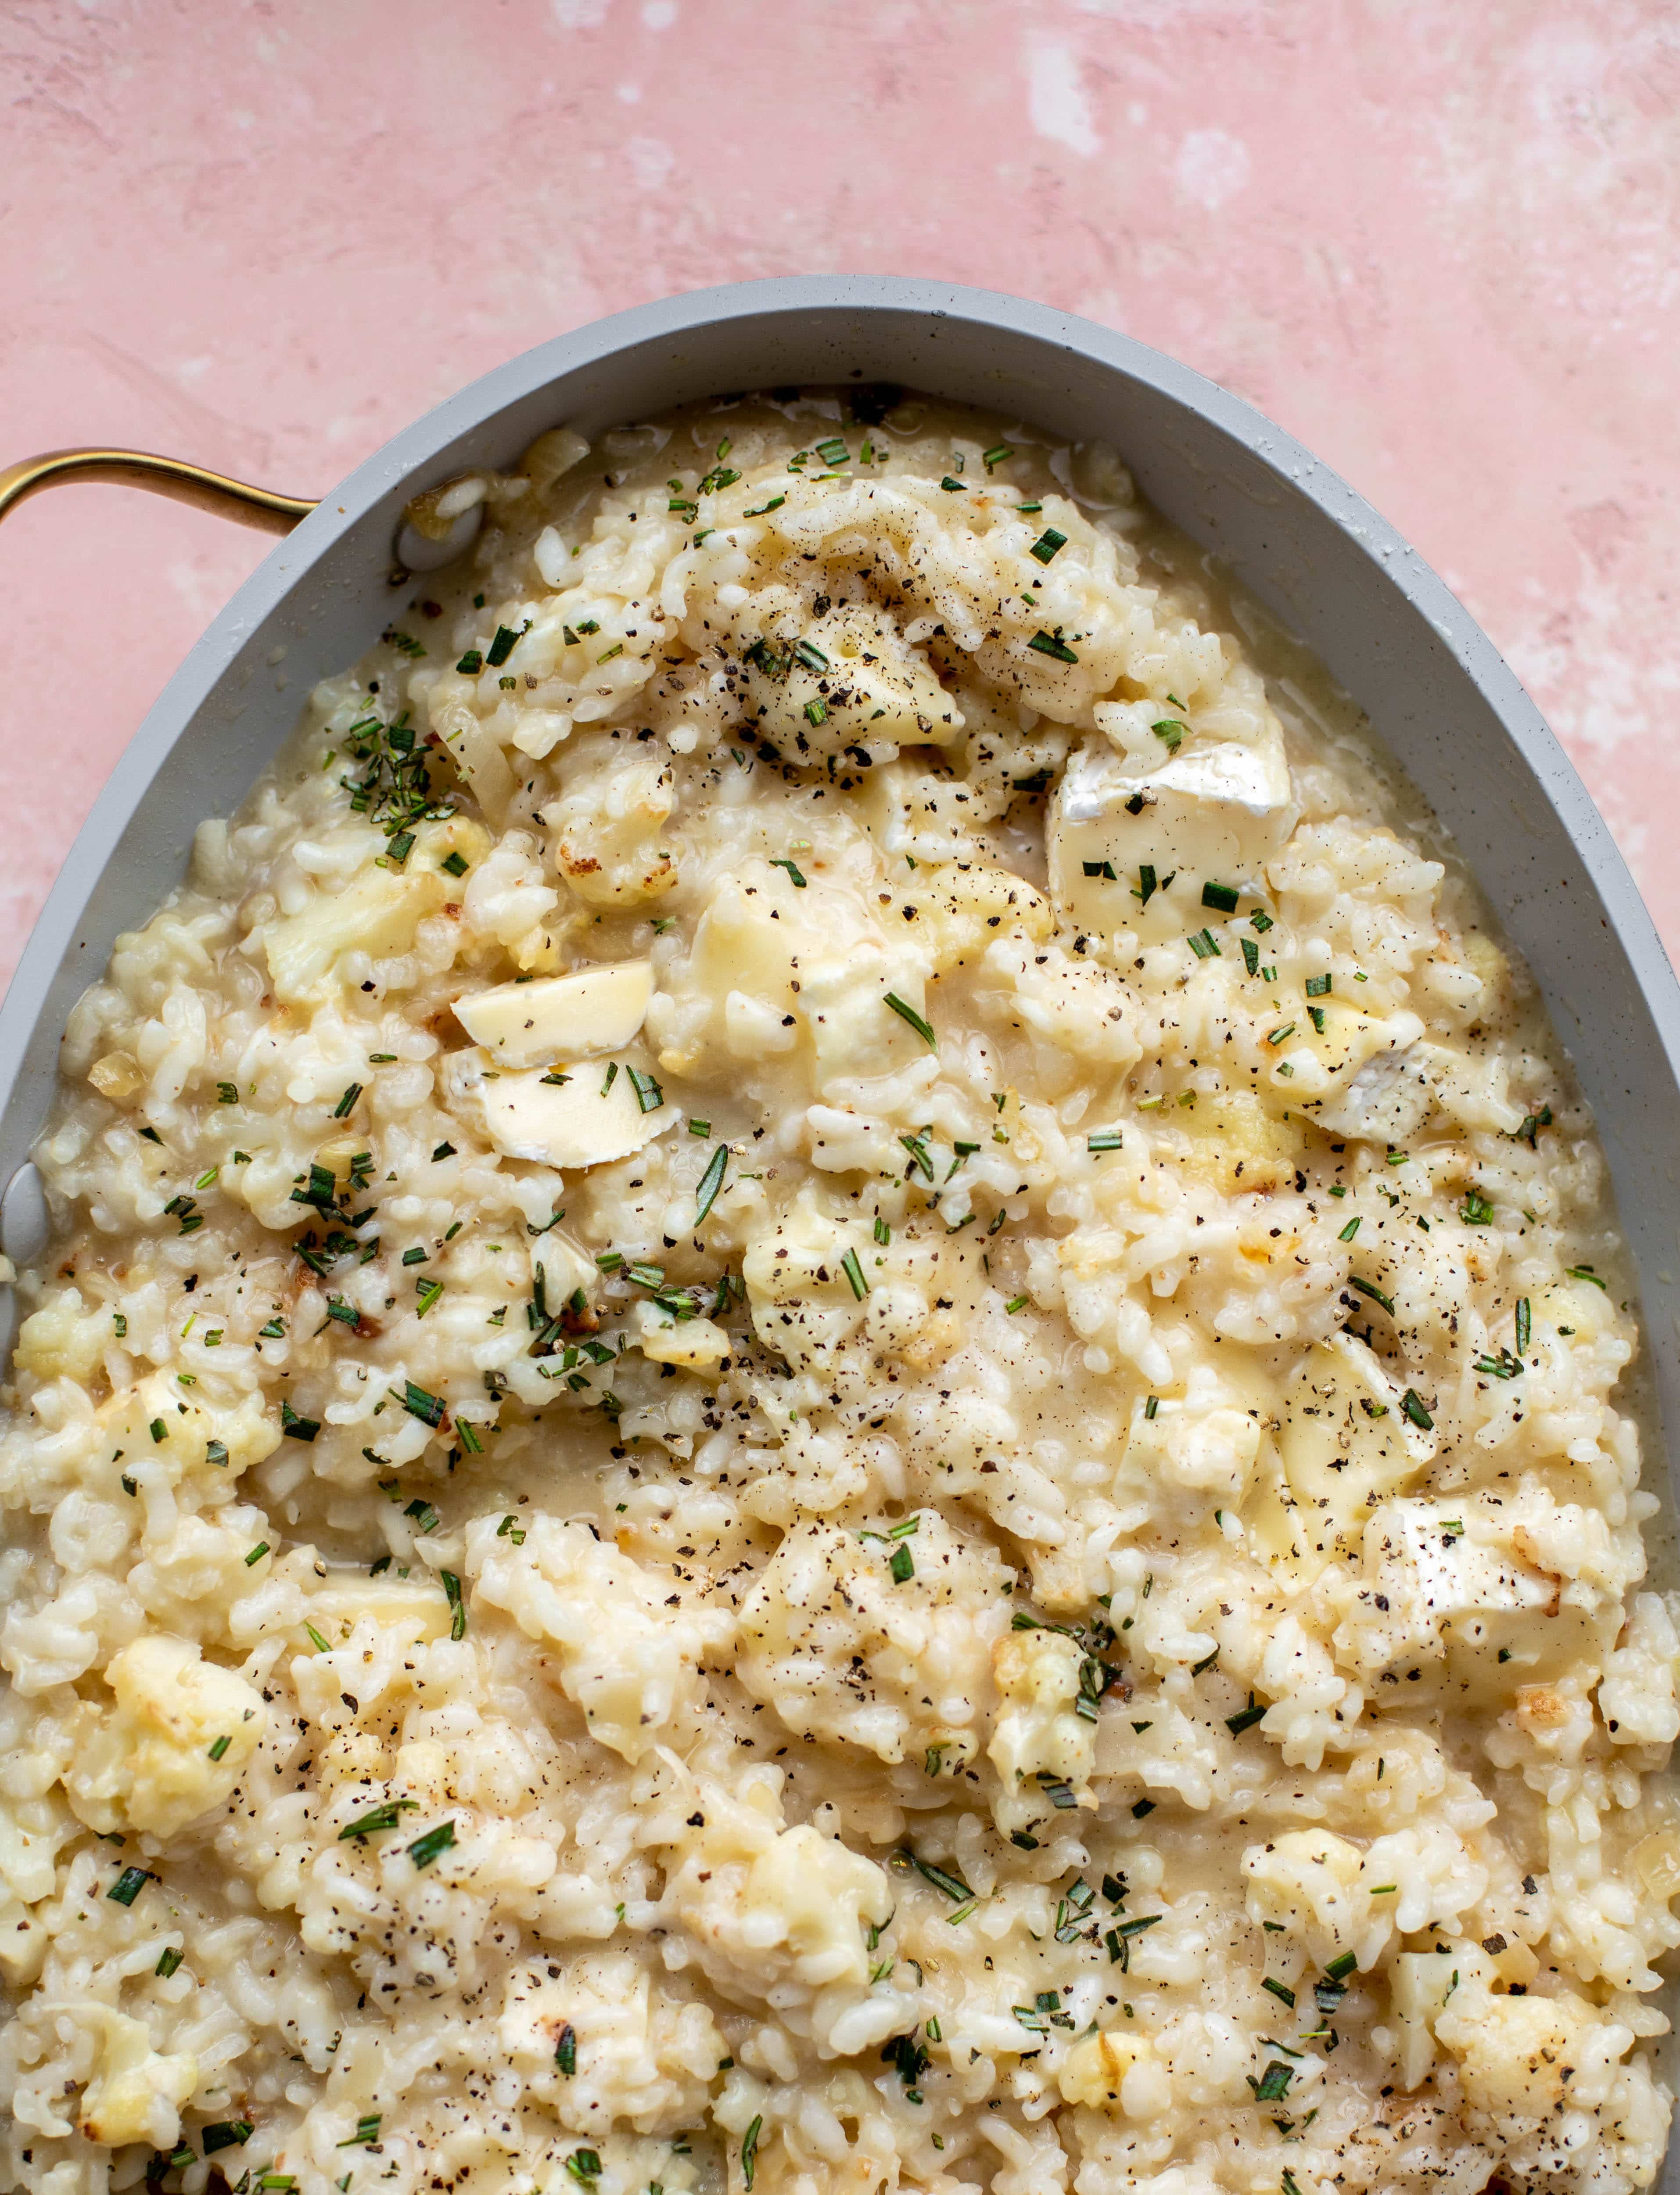 This baked risotto is delicious and so much easier than the stovetop version! Toasted cauliflower, brie cheese and rosemary make this taste incredible.